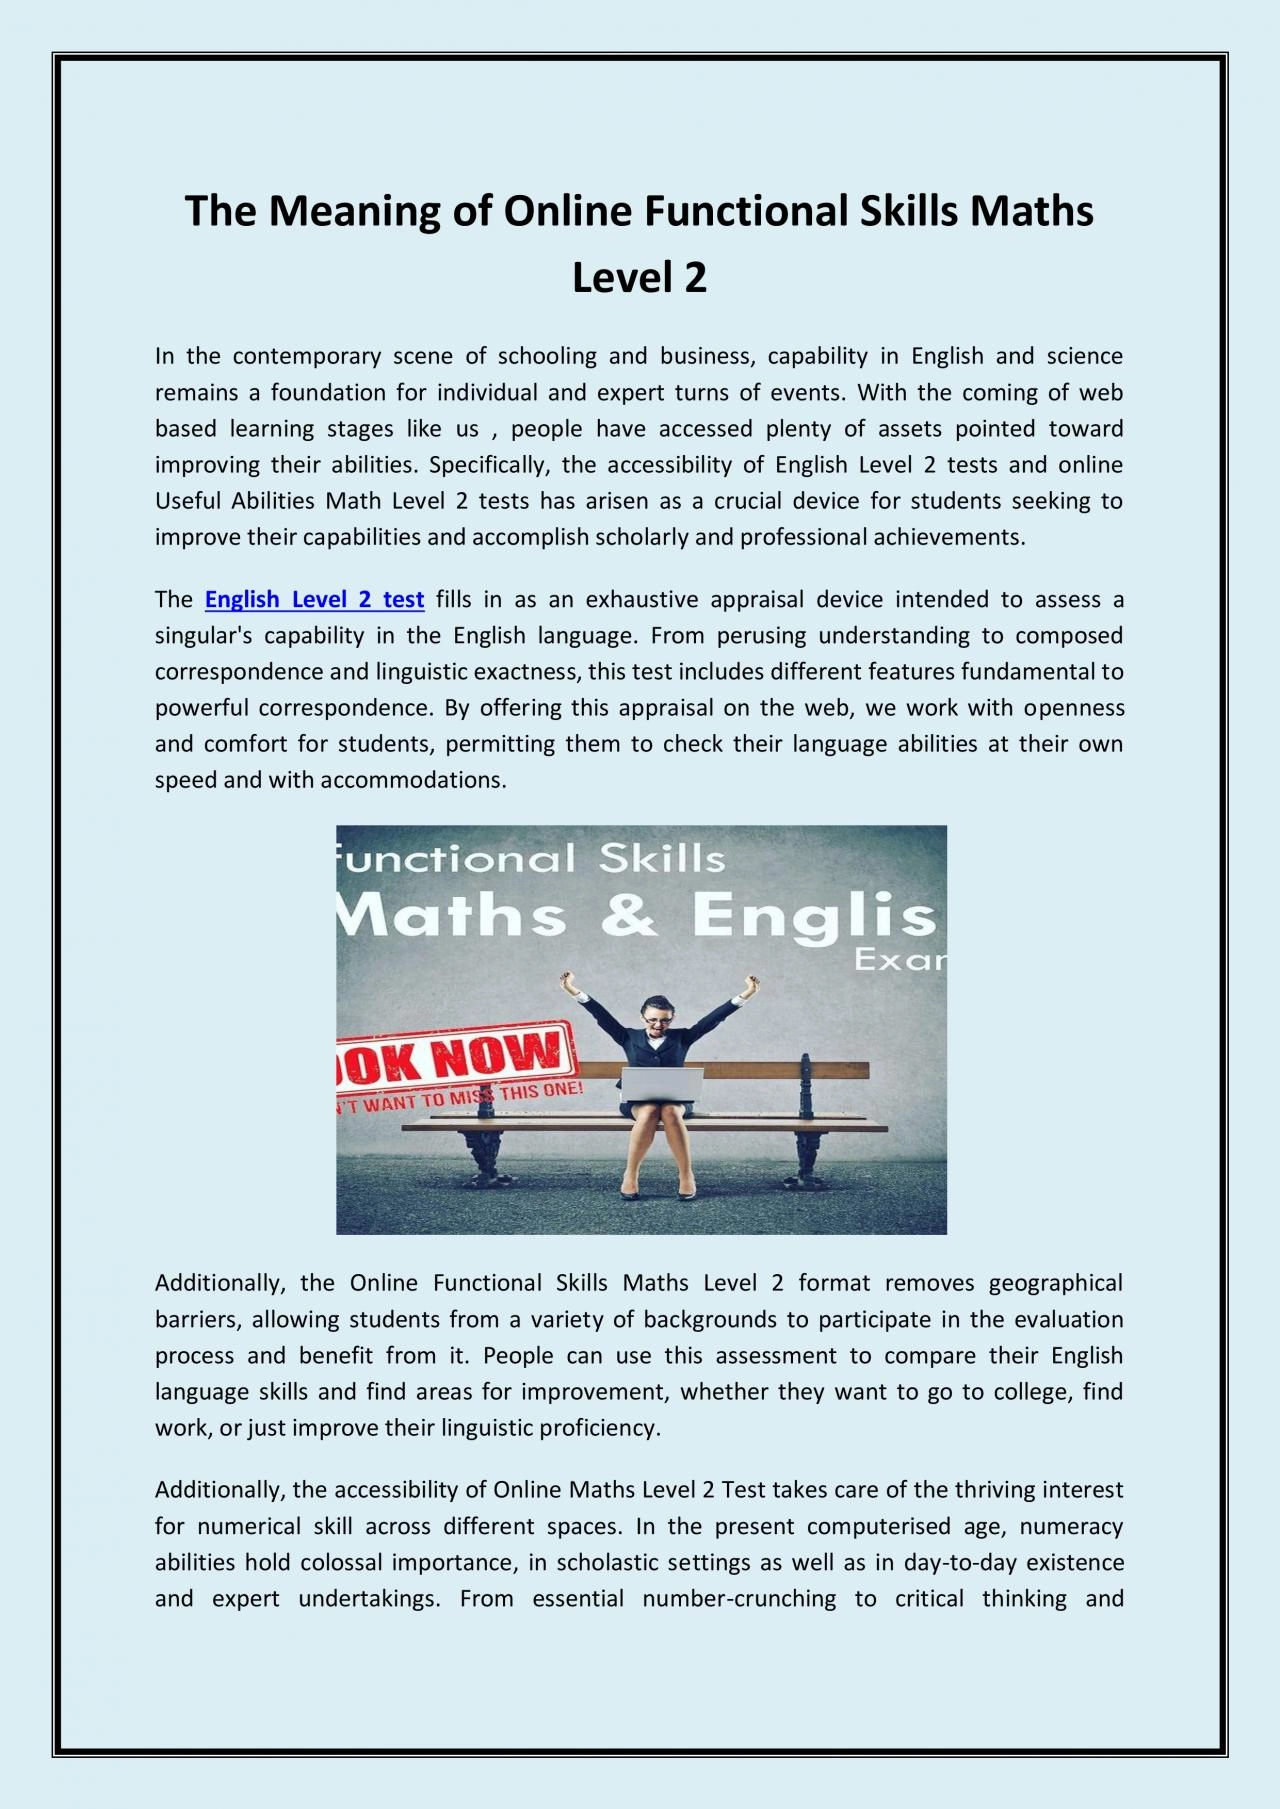 The Meaning of Online Functional Skills Maths Level 2